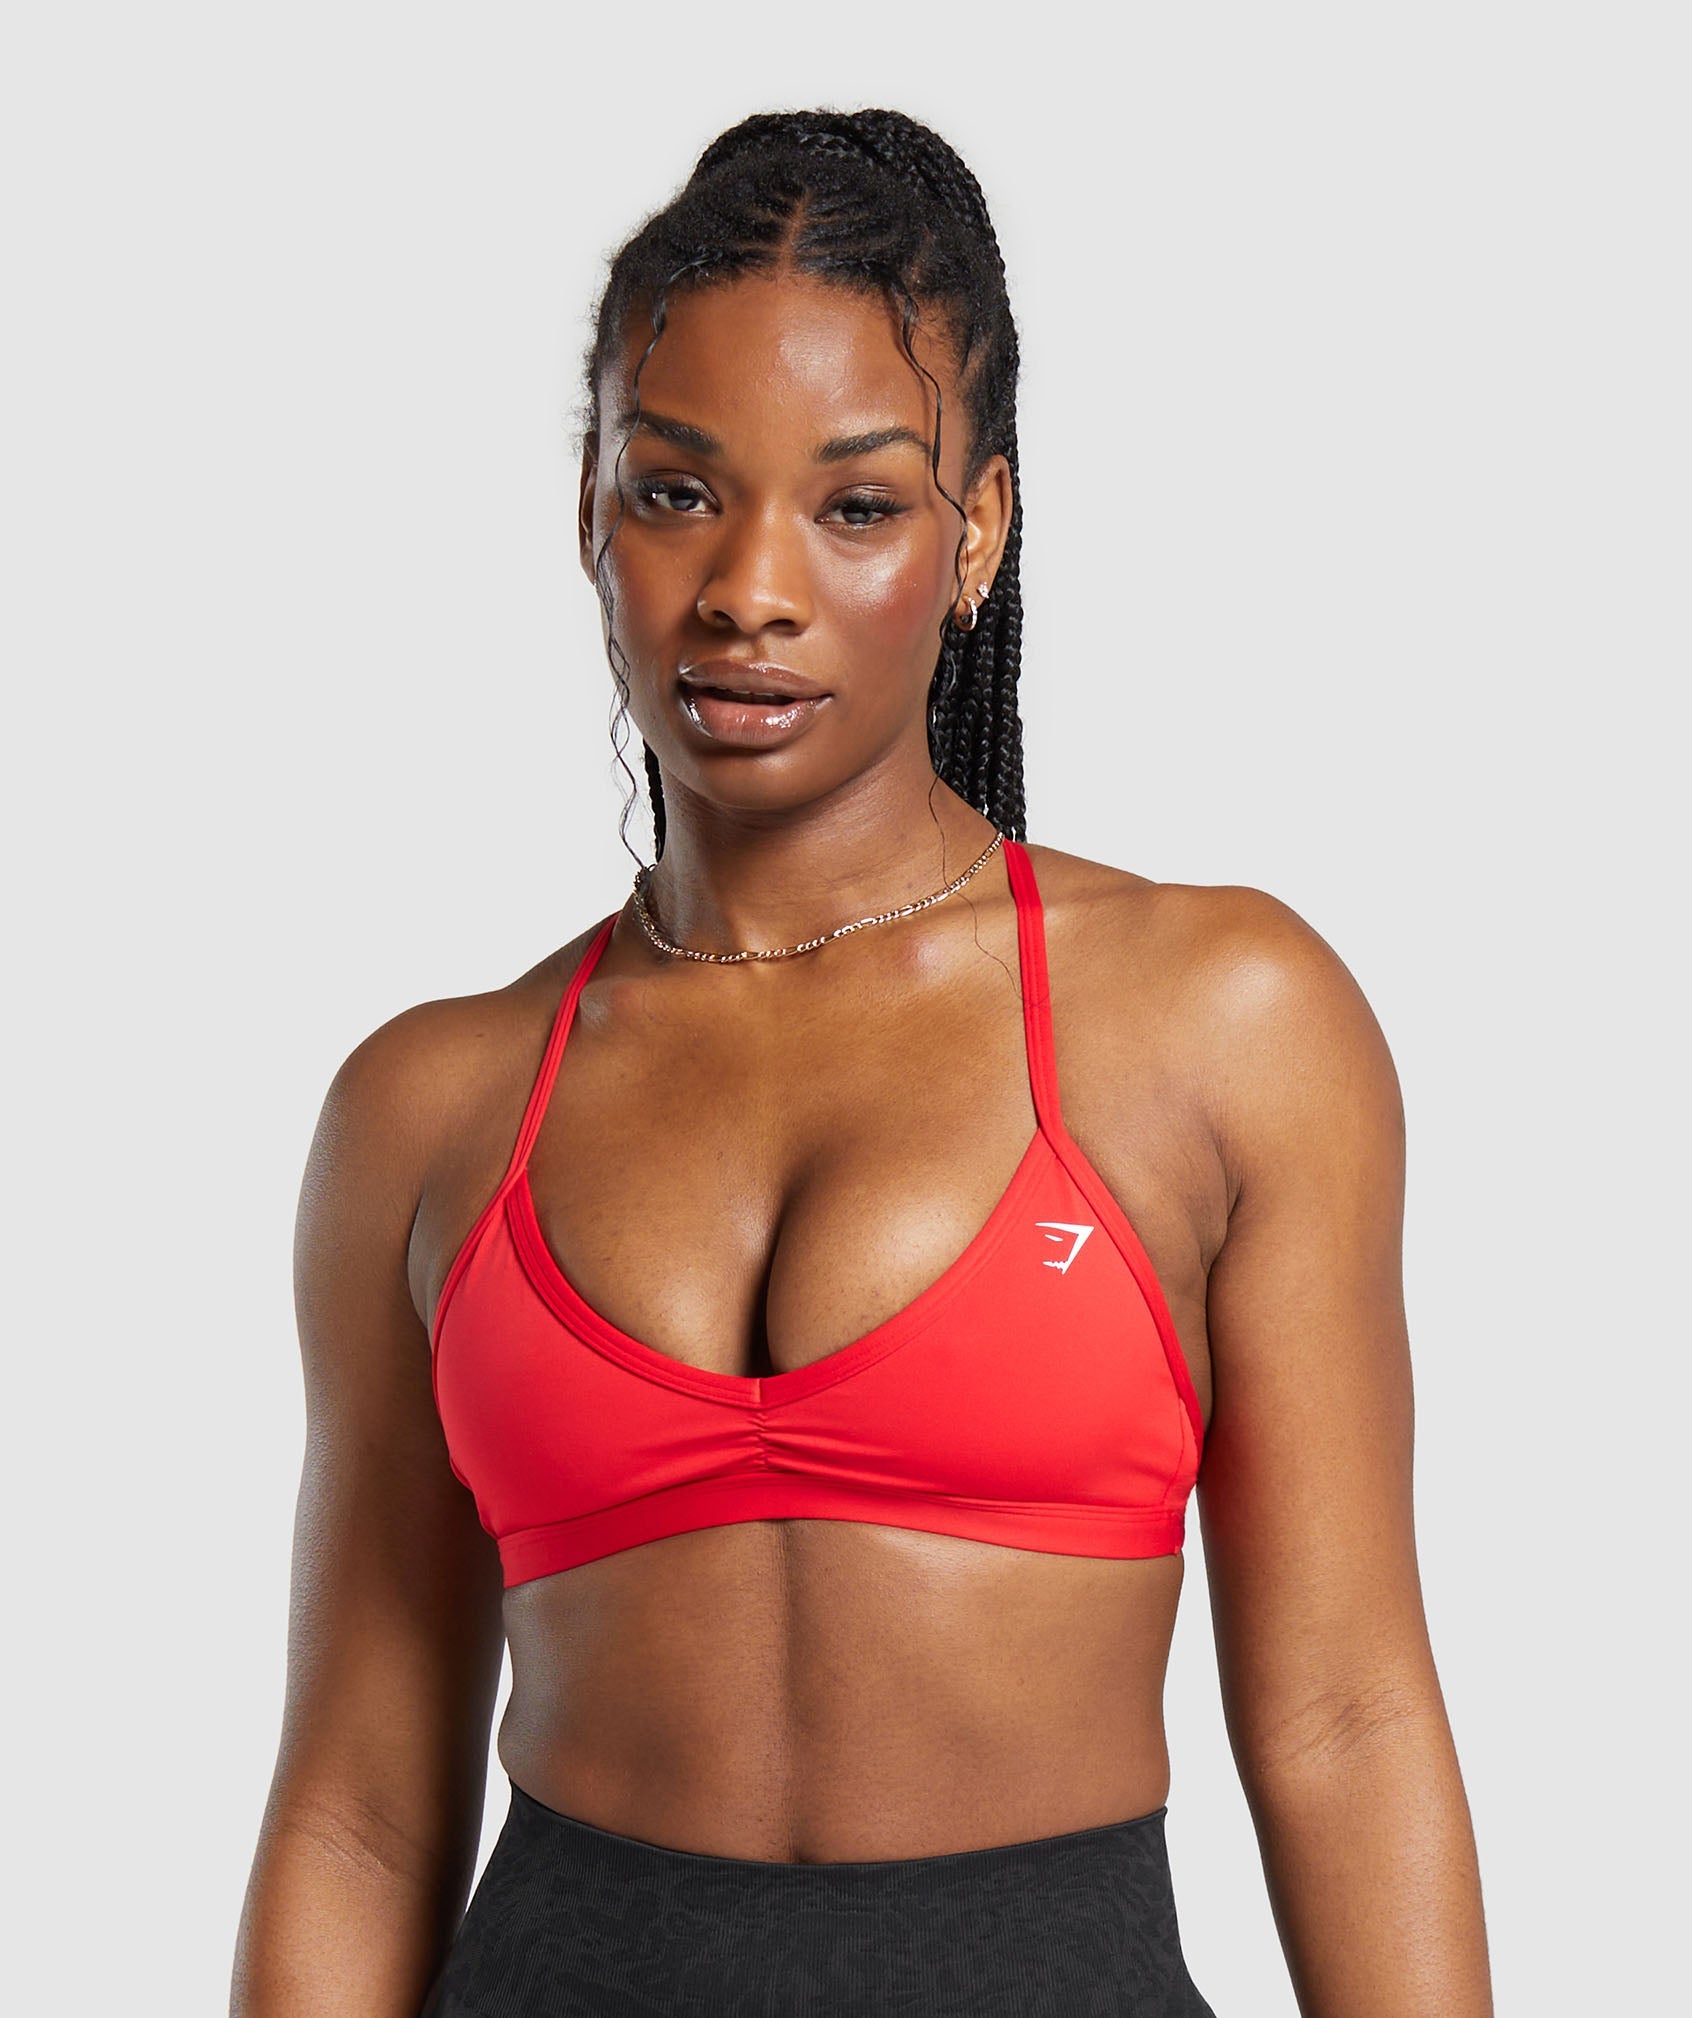 Minimal Sports Bra in Jamz Red is out of stock